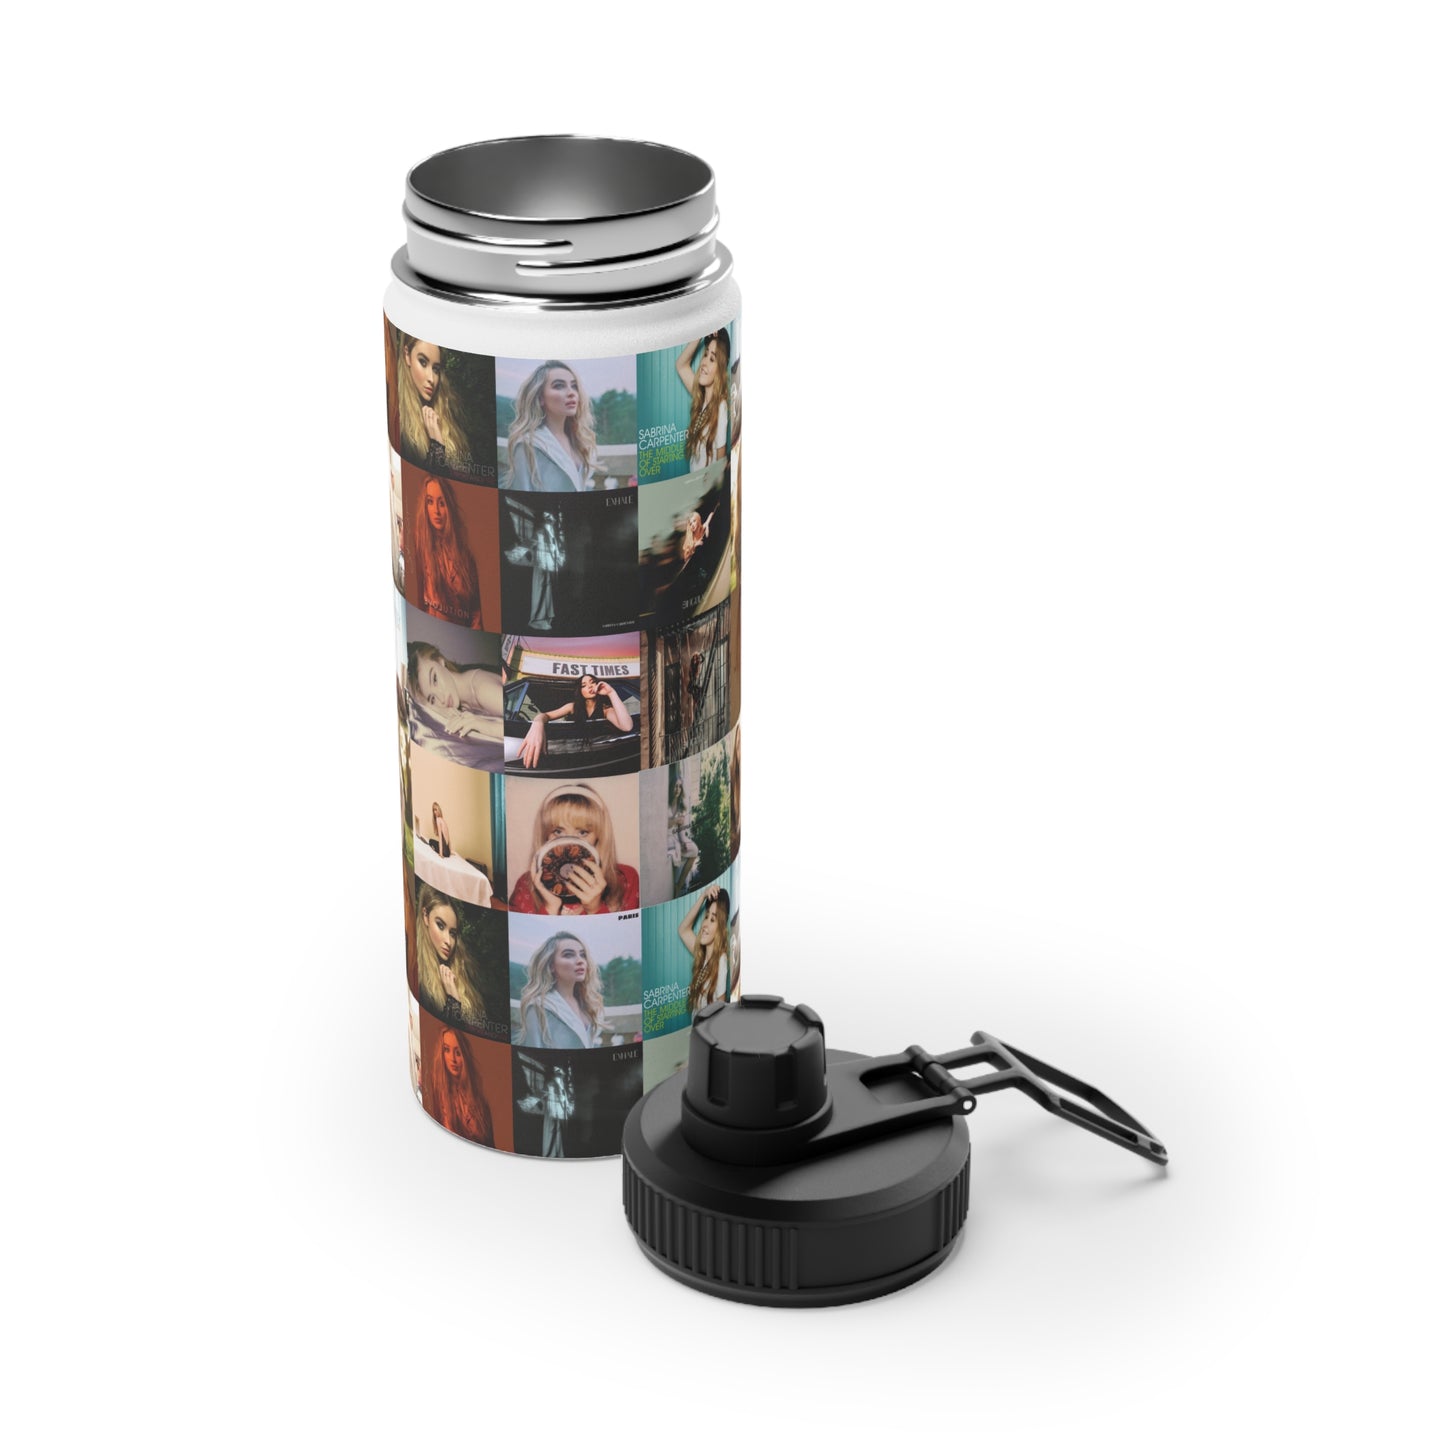 Sabrina Carpenter Album Cover Collage Stainless Steel Water Bottle with Sports Lid